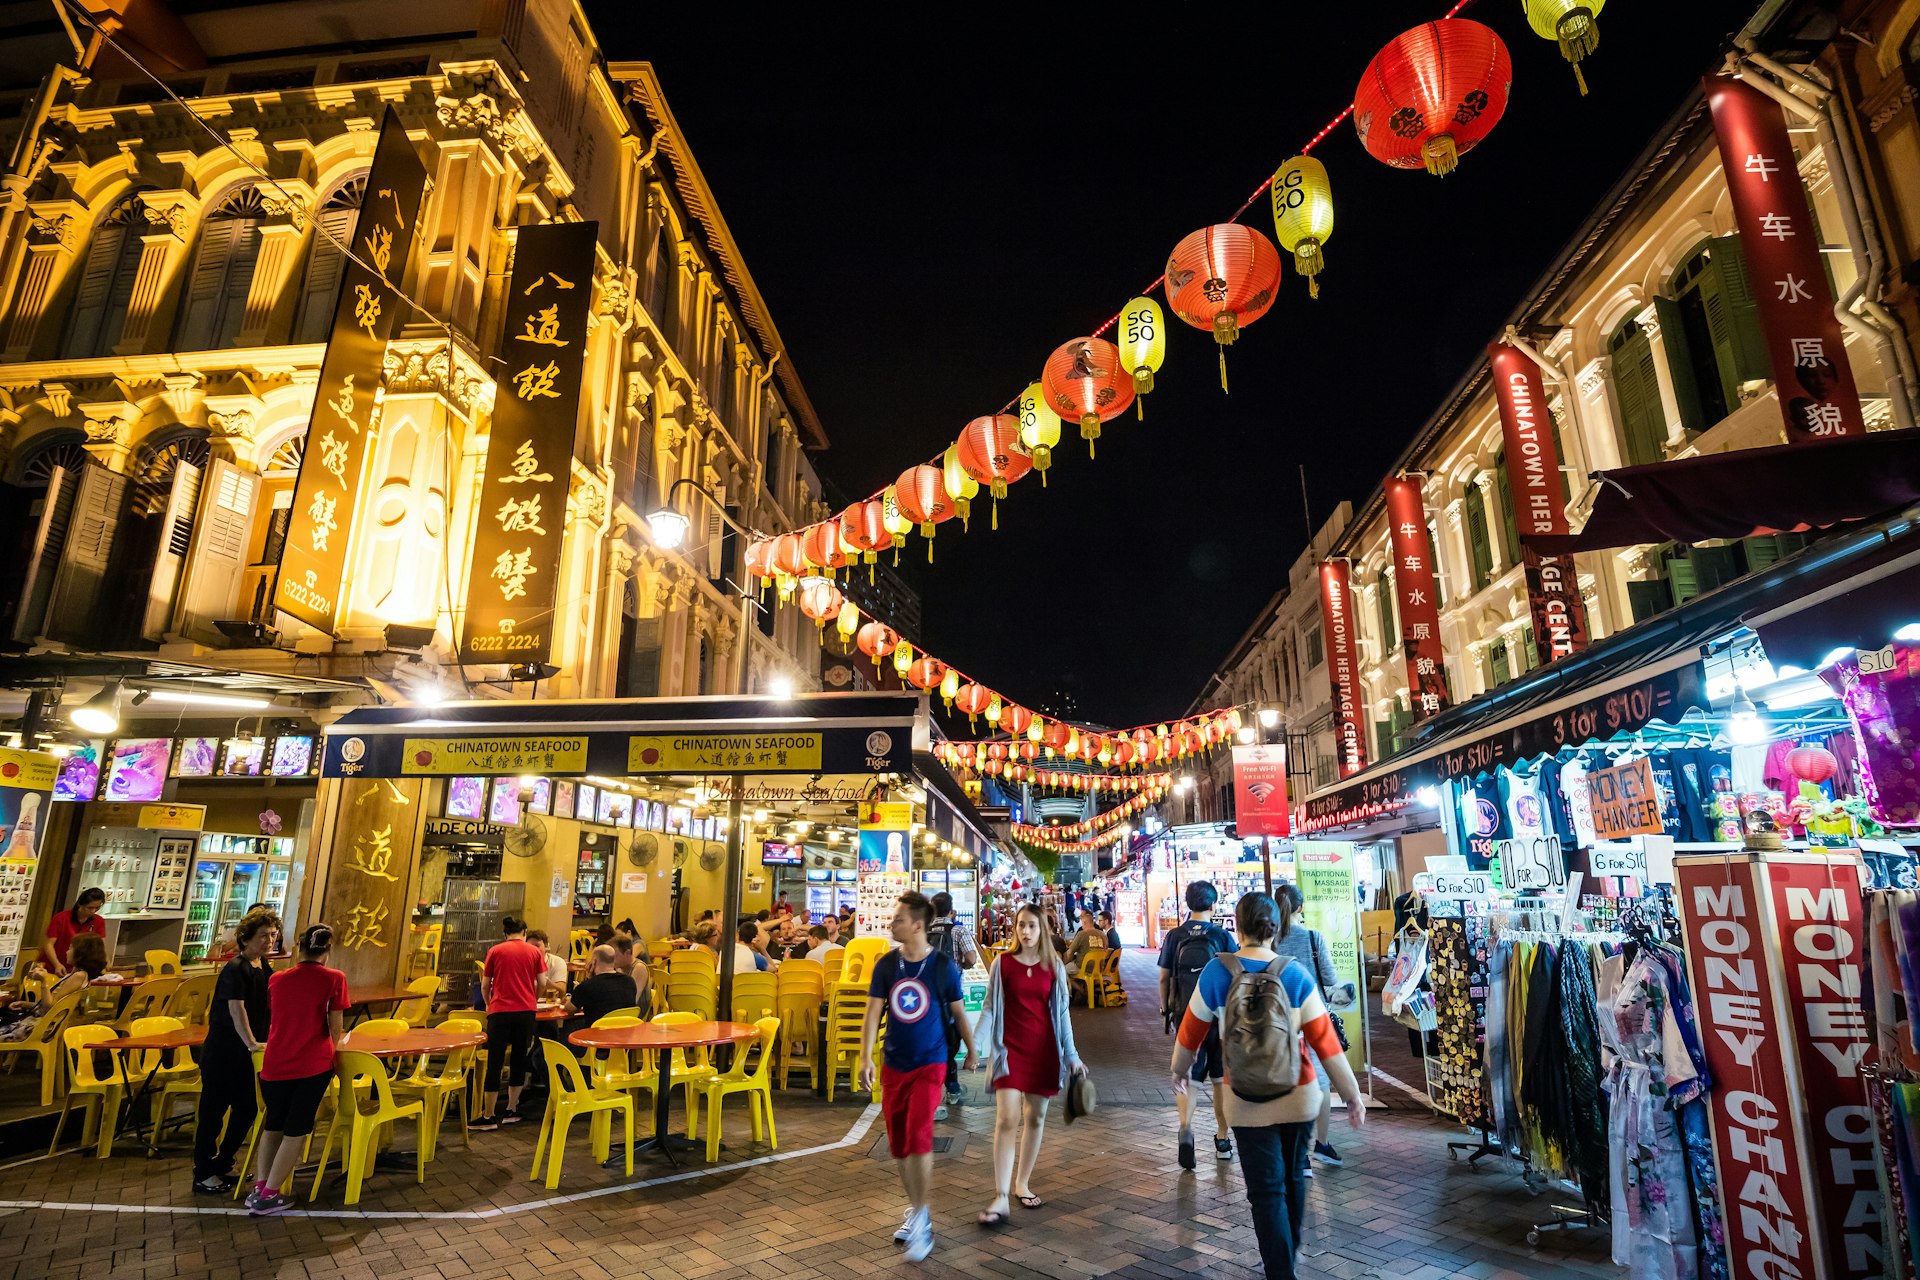 The Chinatown district in Singapore with diners sat on yellow plastic chairs and tables outside restaurants at night with lanterns hanging across the street lit up.